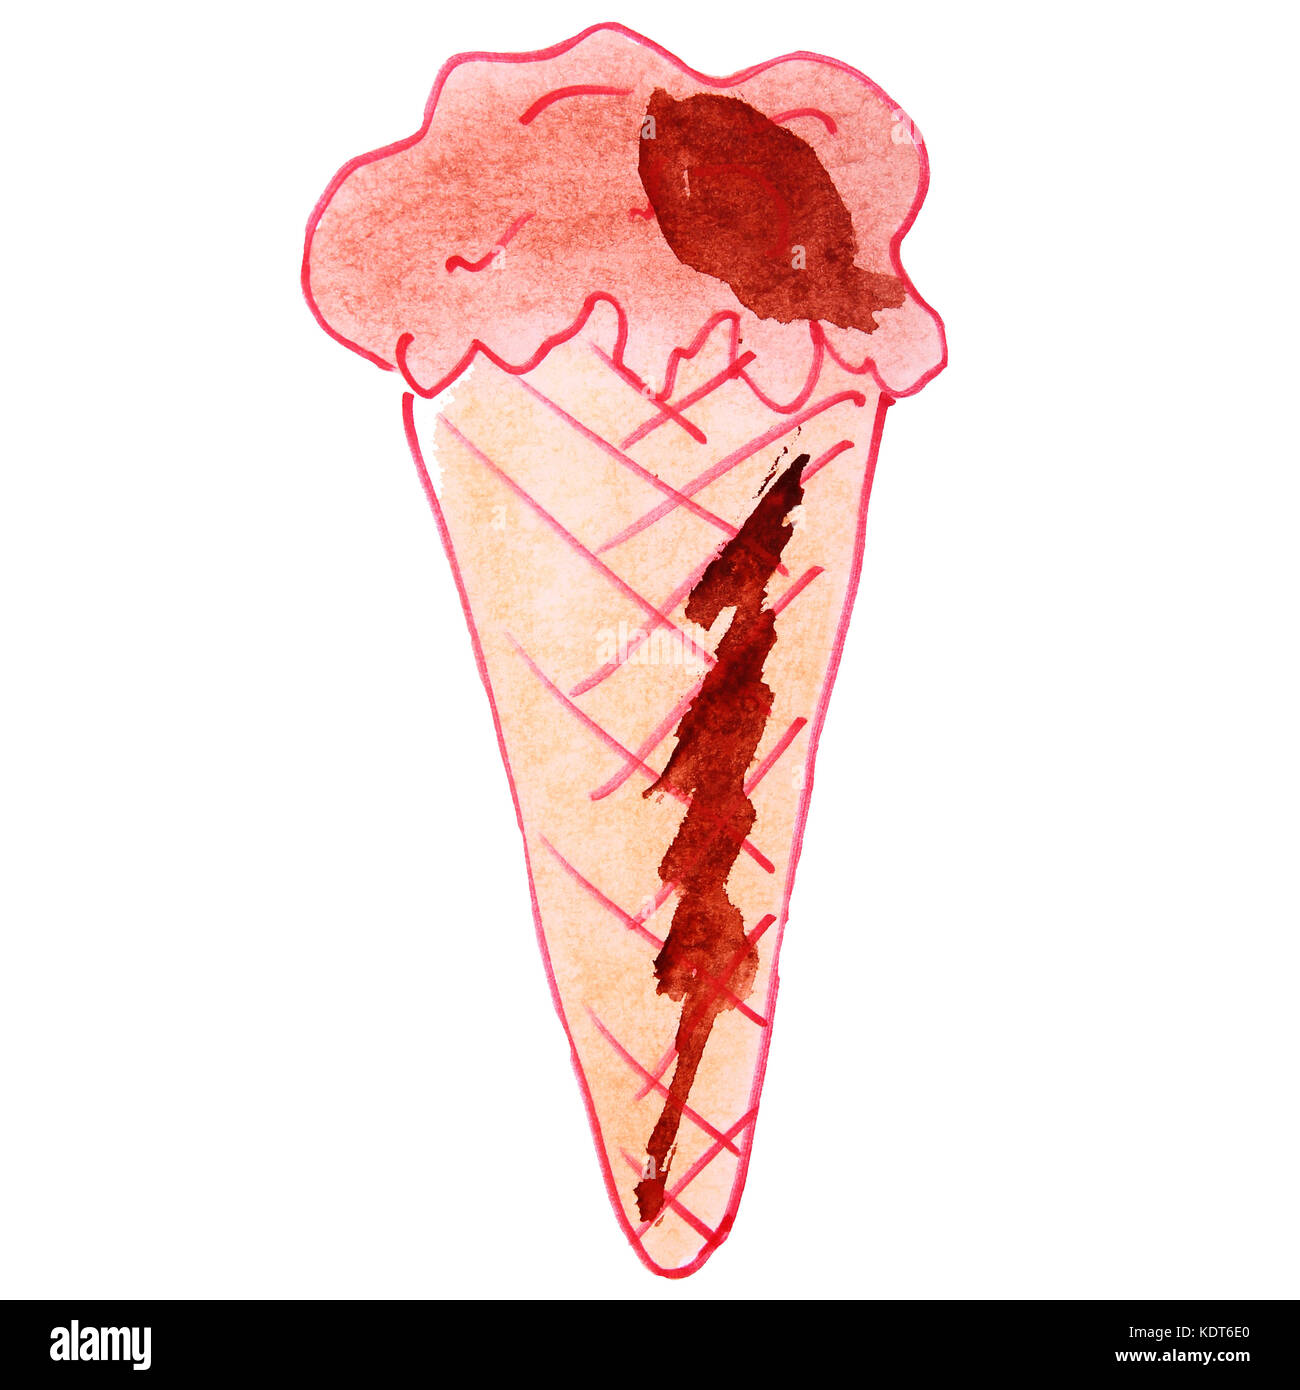 Watercolor Drawing Kids Ice Cream Cone Cartoon On White Backgrou